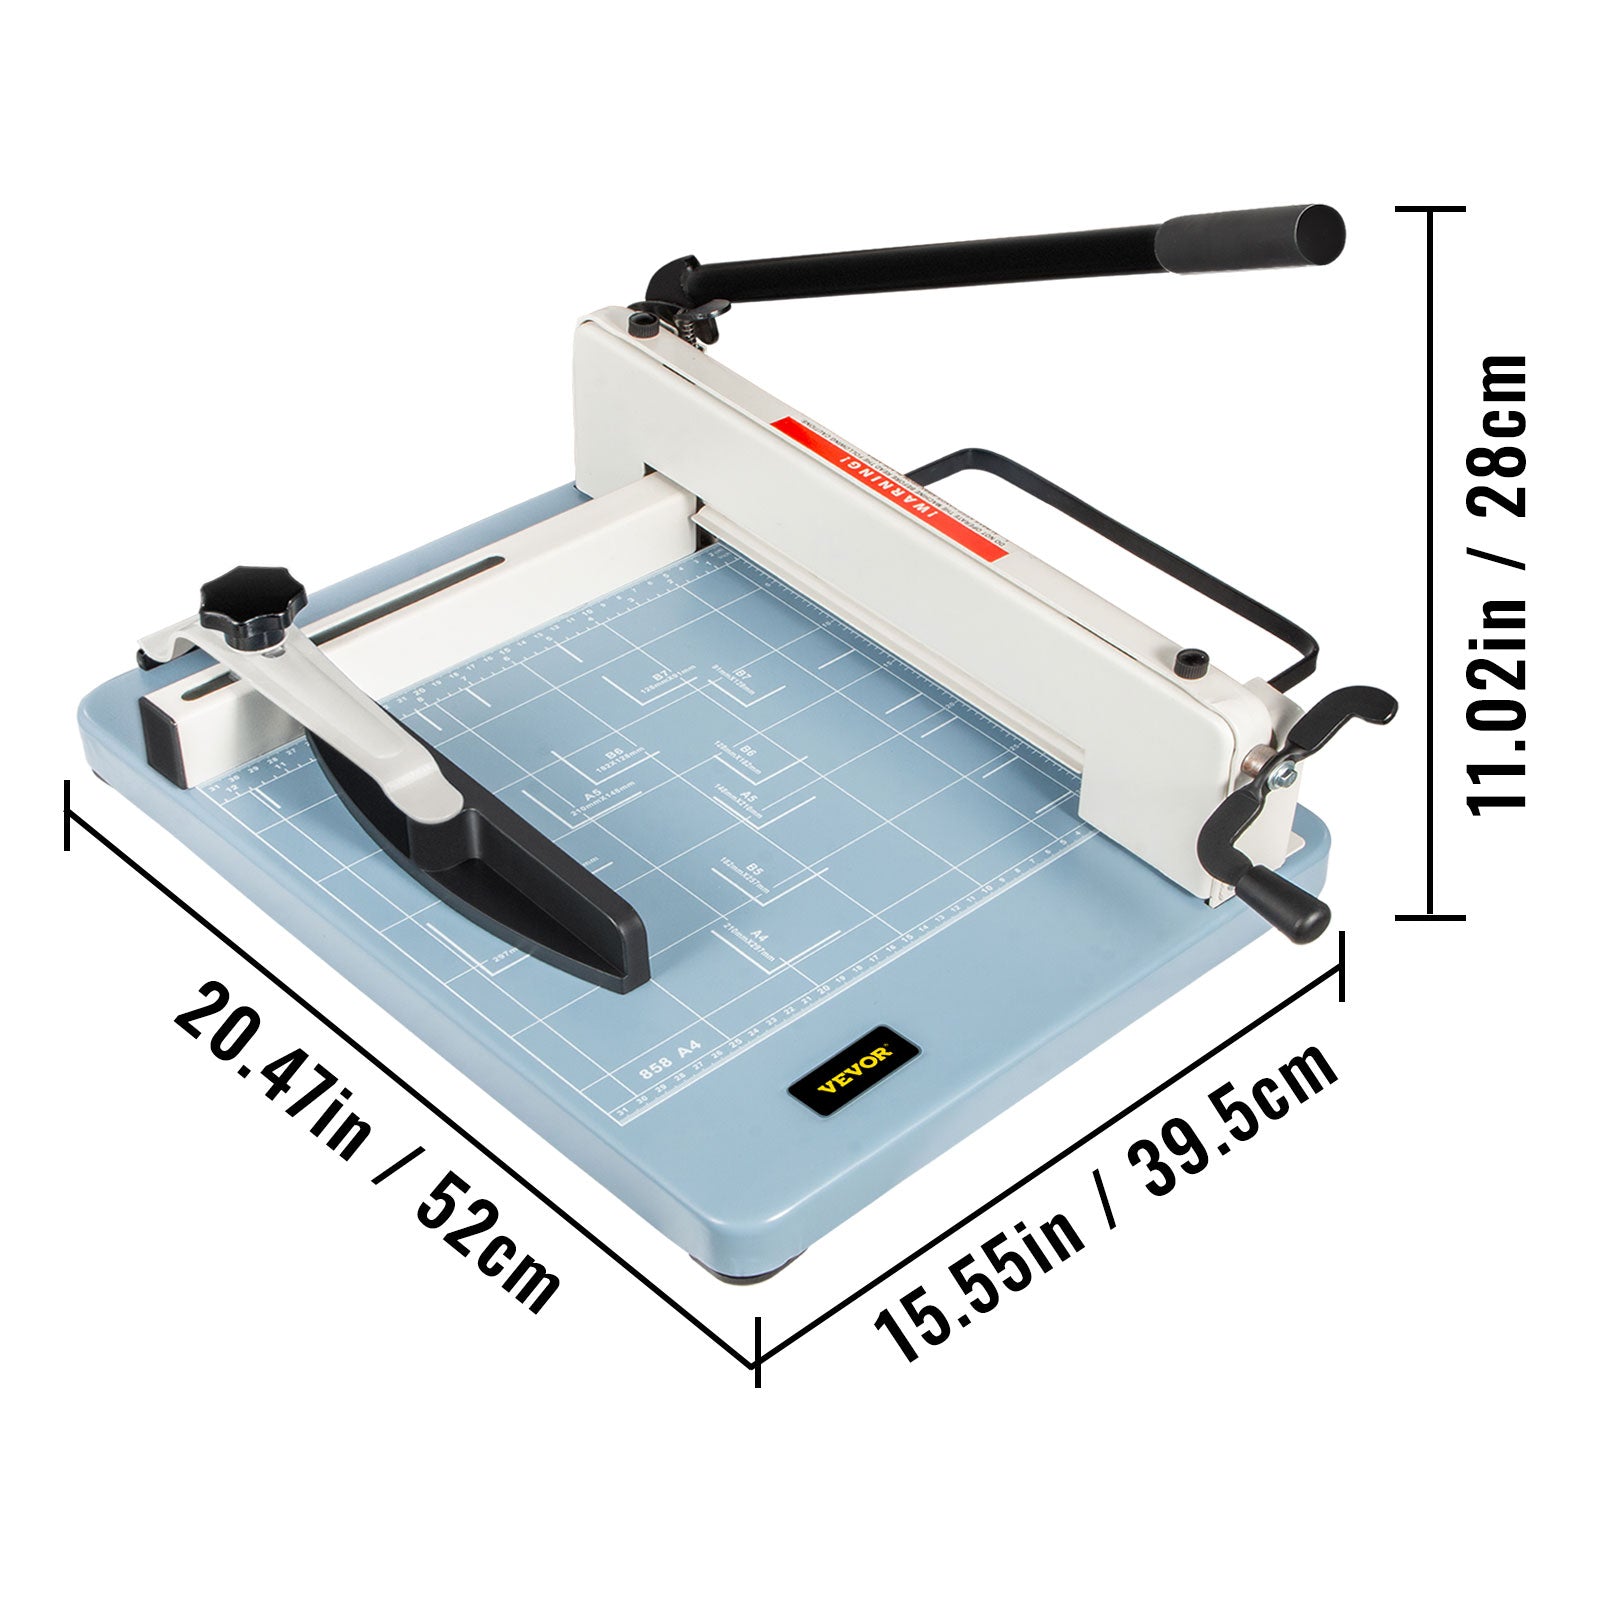 Paper Cutter Machine, Heavy Duty Cutting Capacity, Adjustable Clamp